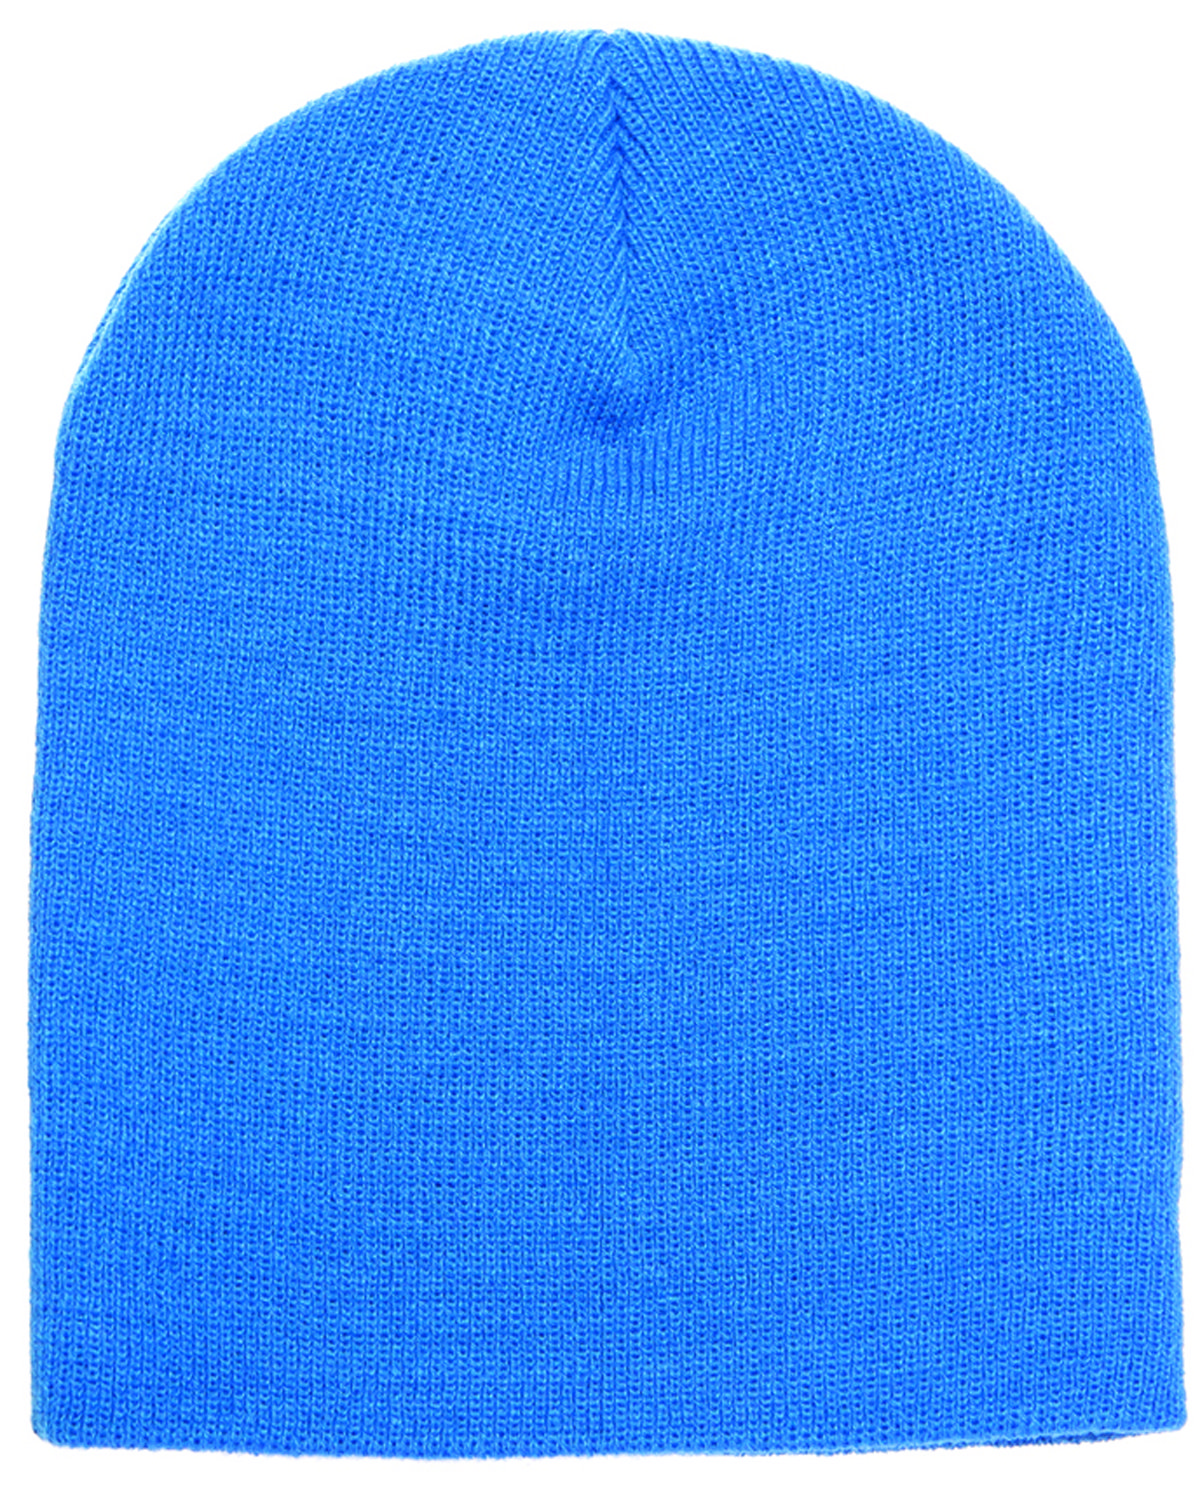 Yupoong Adult Knit Beanie alphabroder 